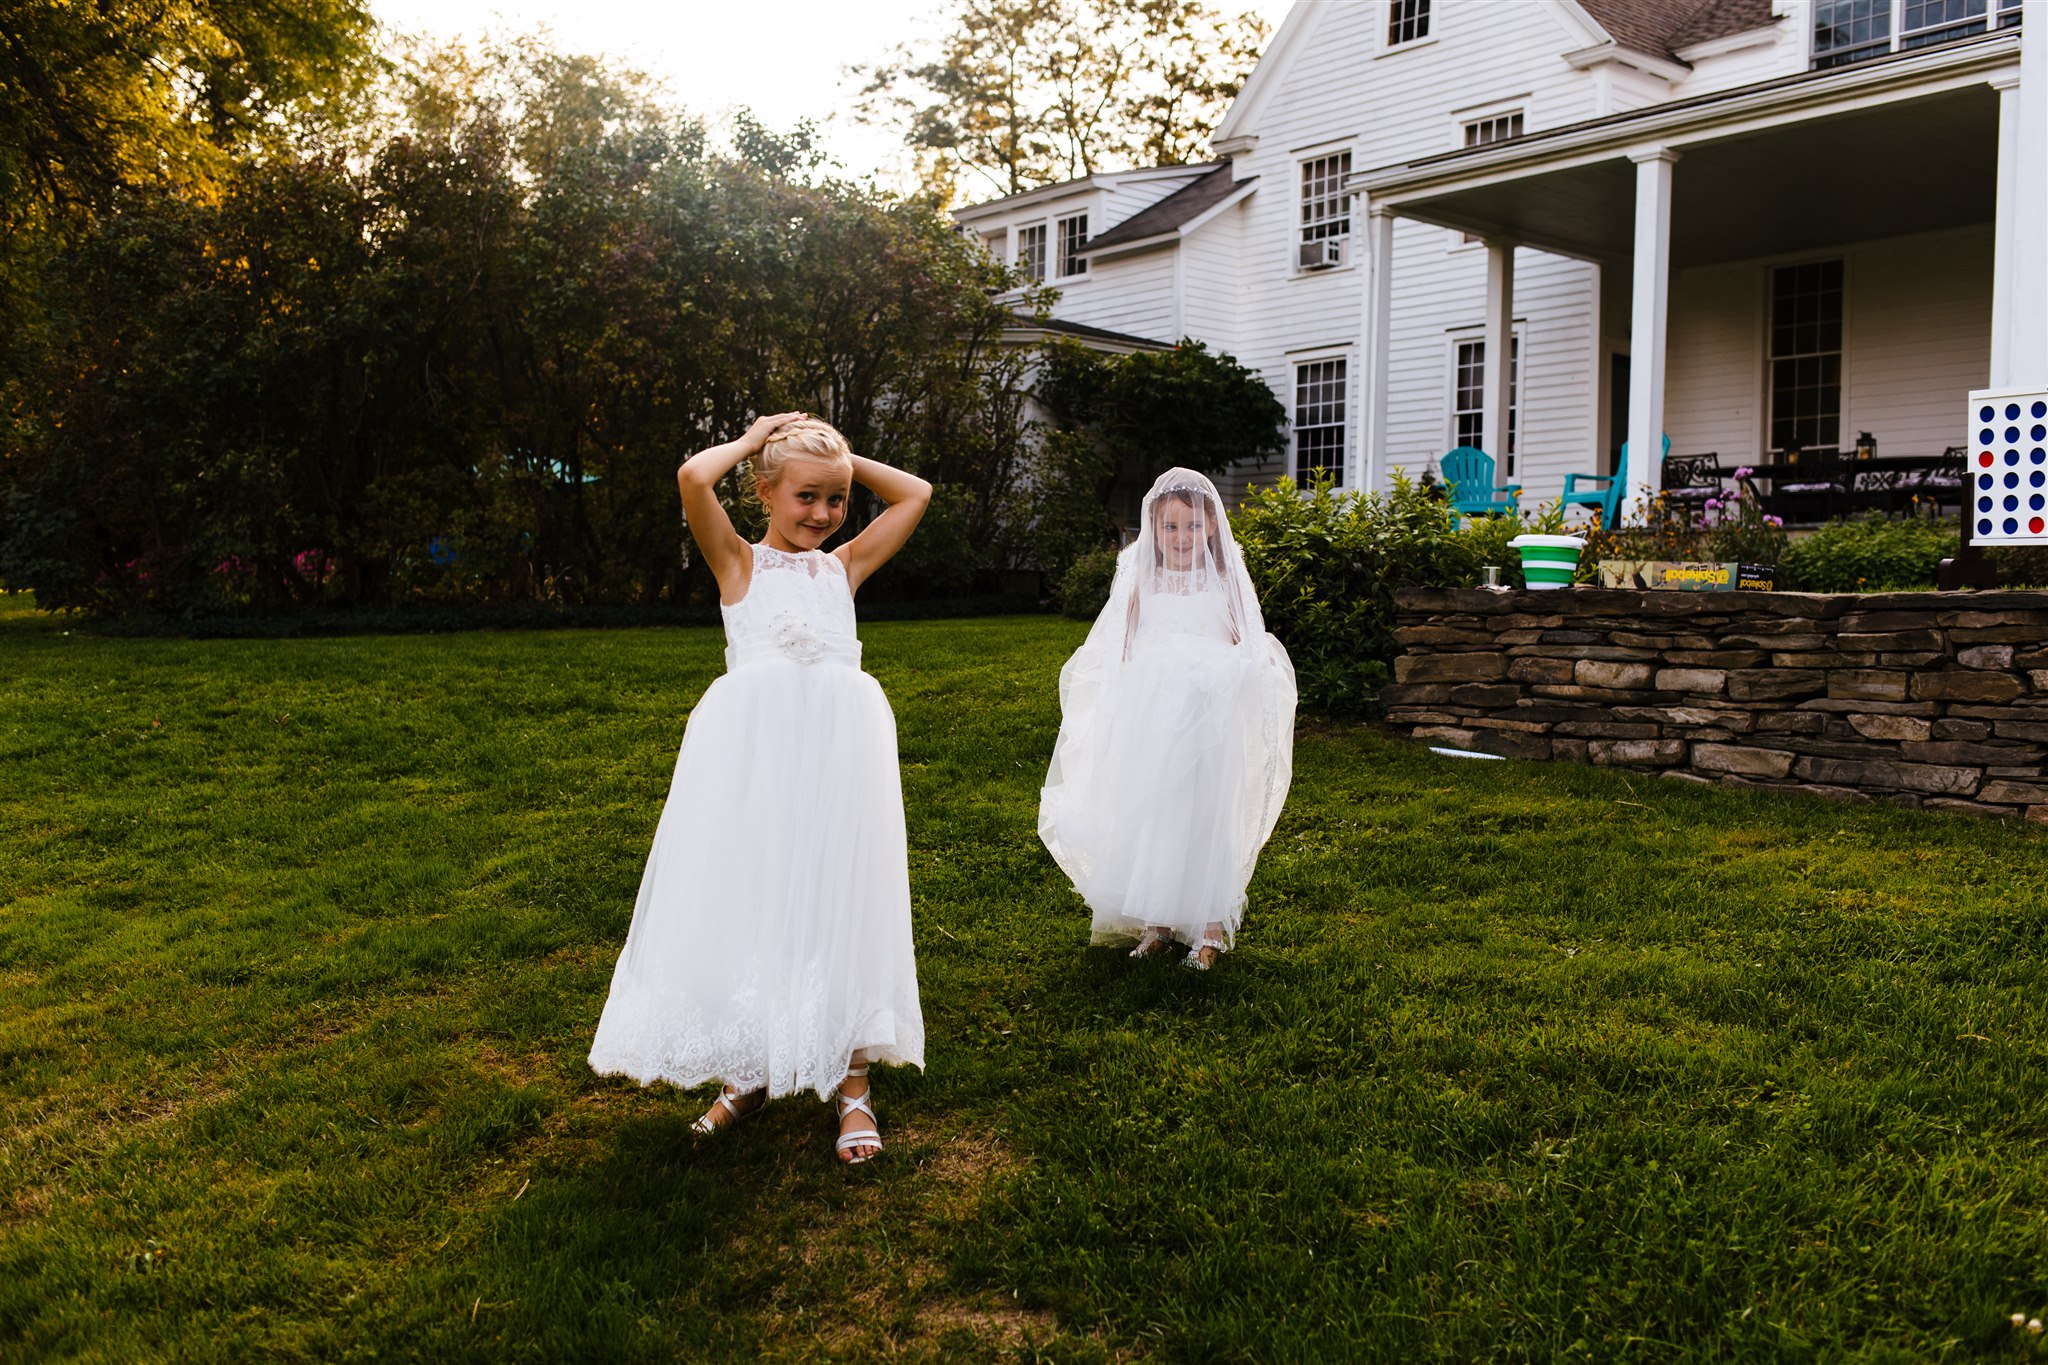 Two flower girls act silly during the wedding day.